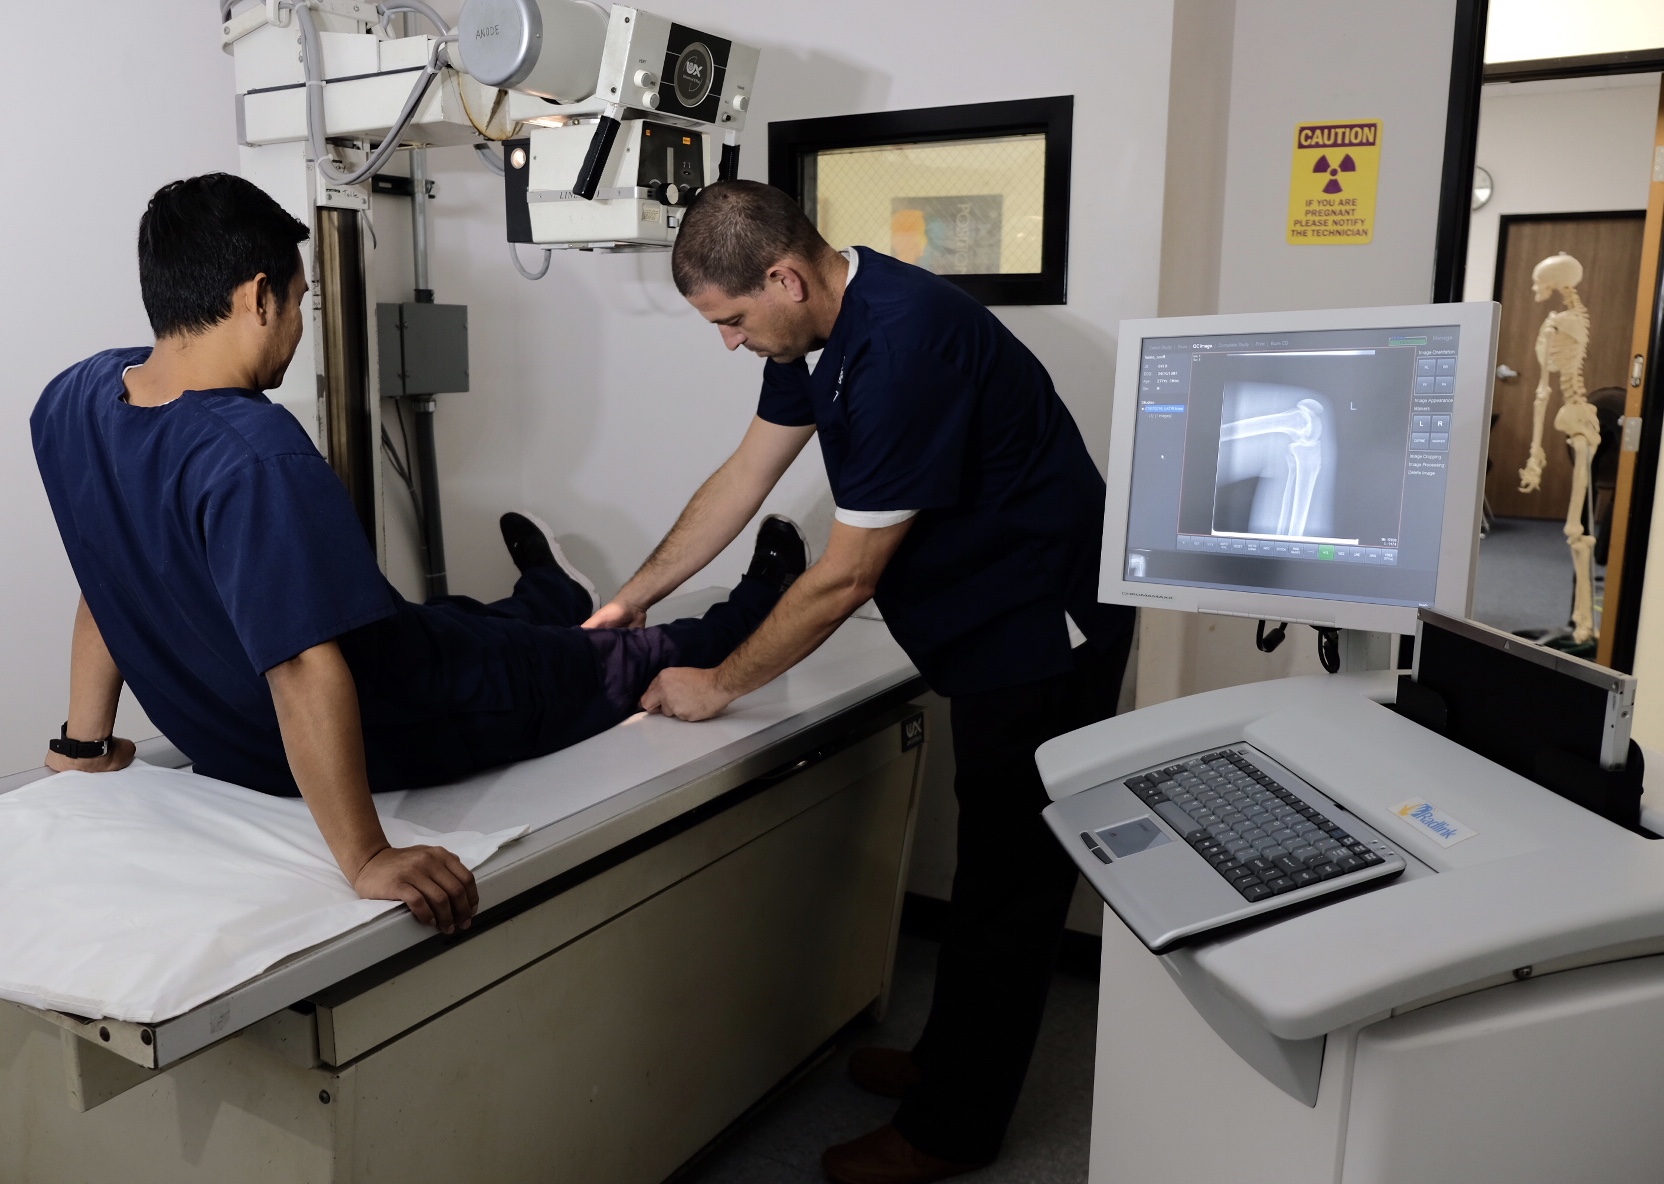 AllInclusive Xray Technician Program Get Everything You Need in 1 Year